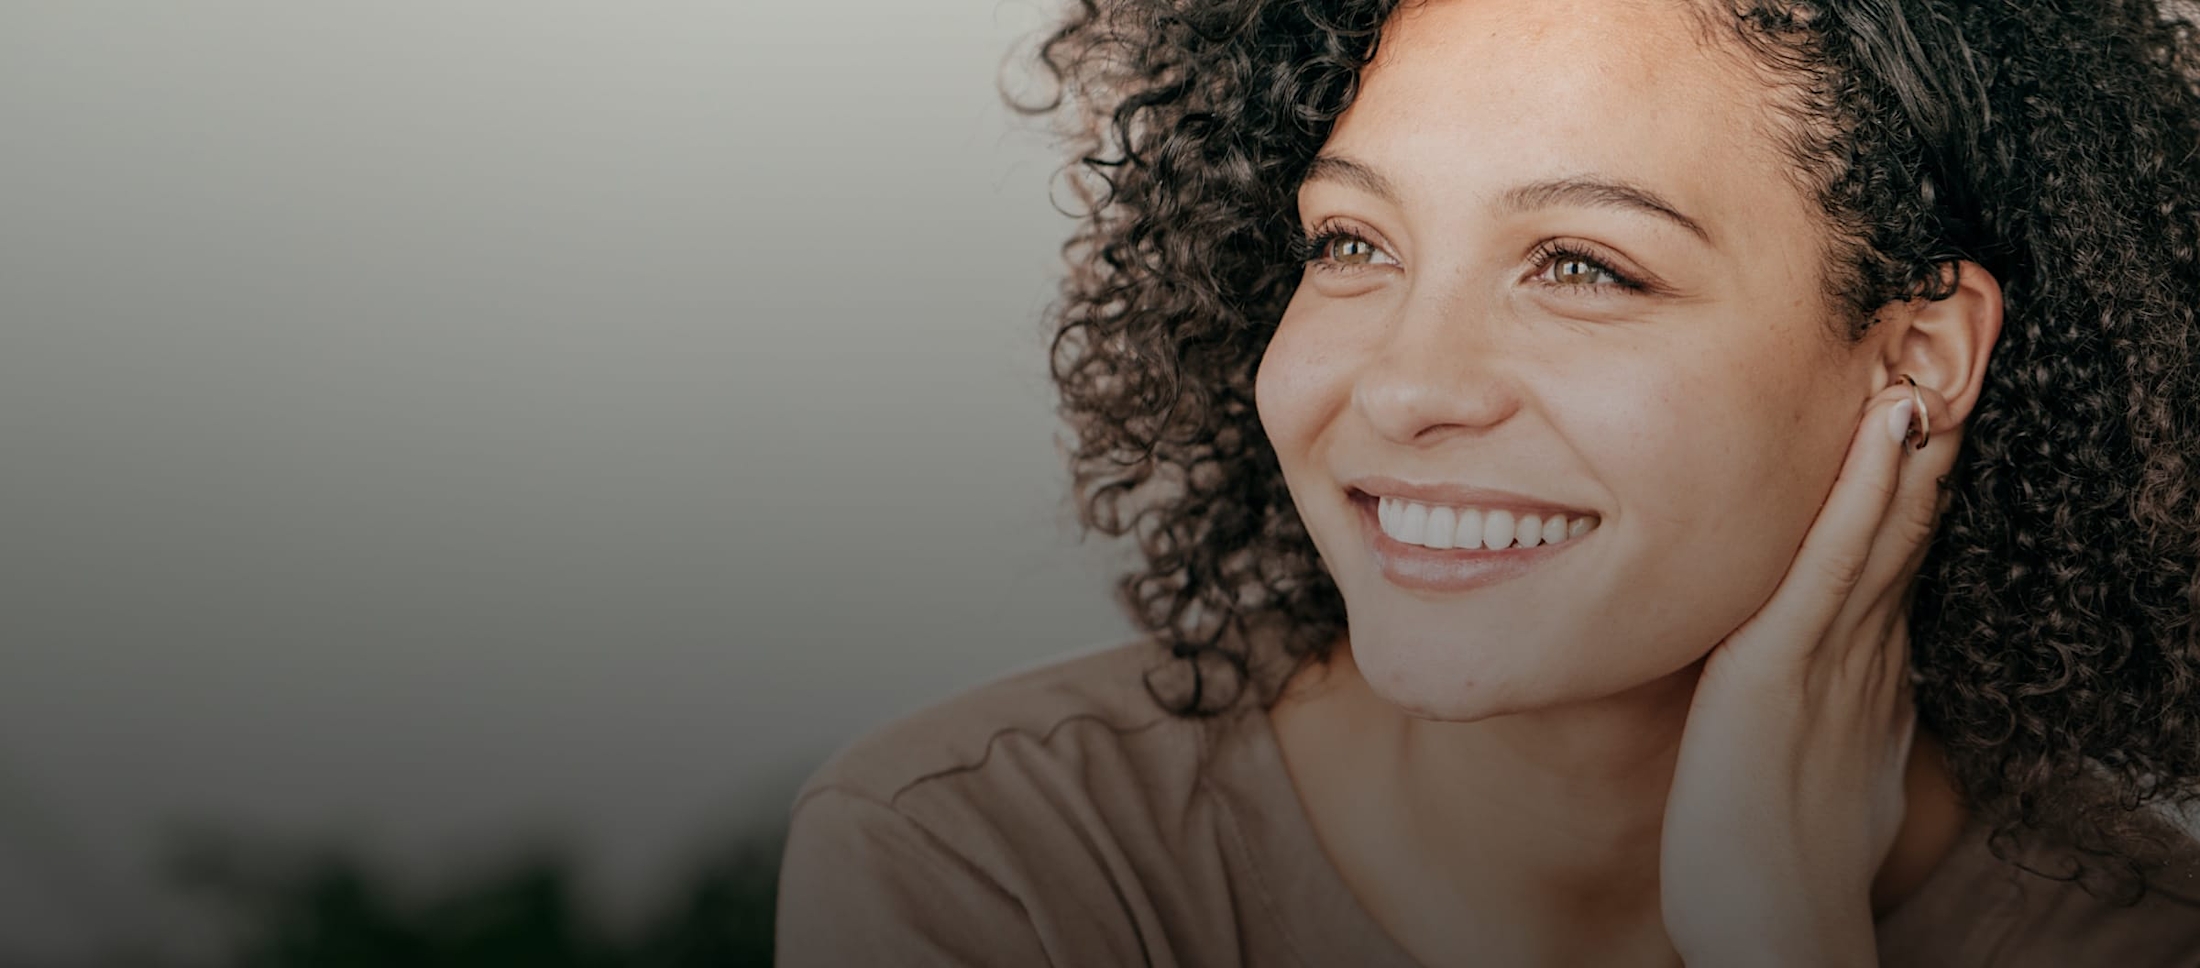 Woman with curly hair smiling, looking to the side